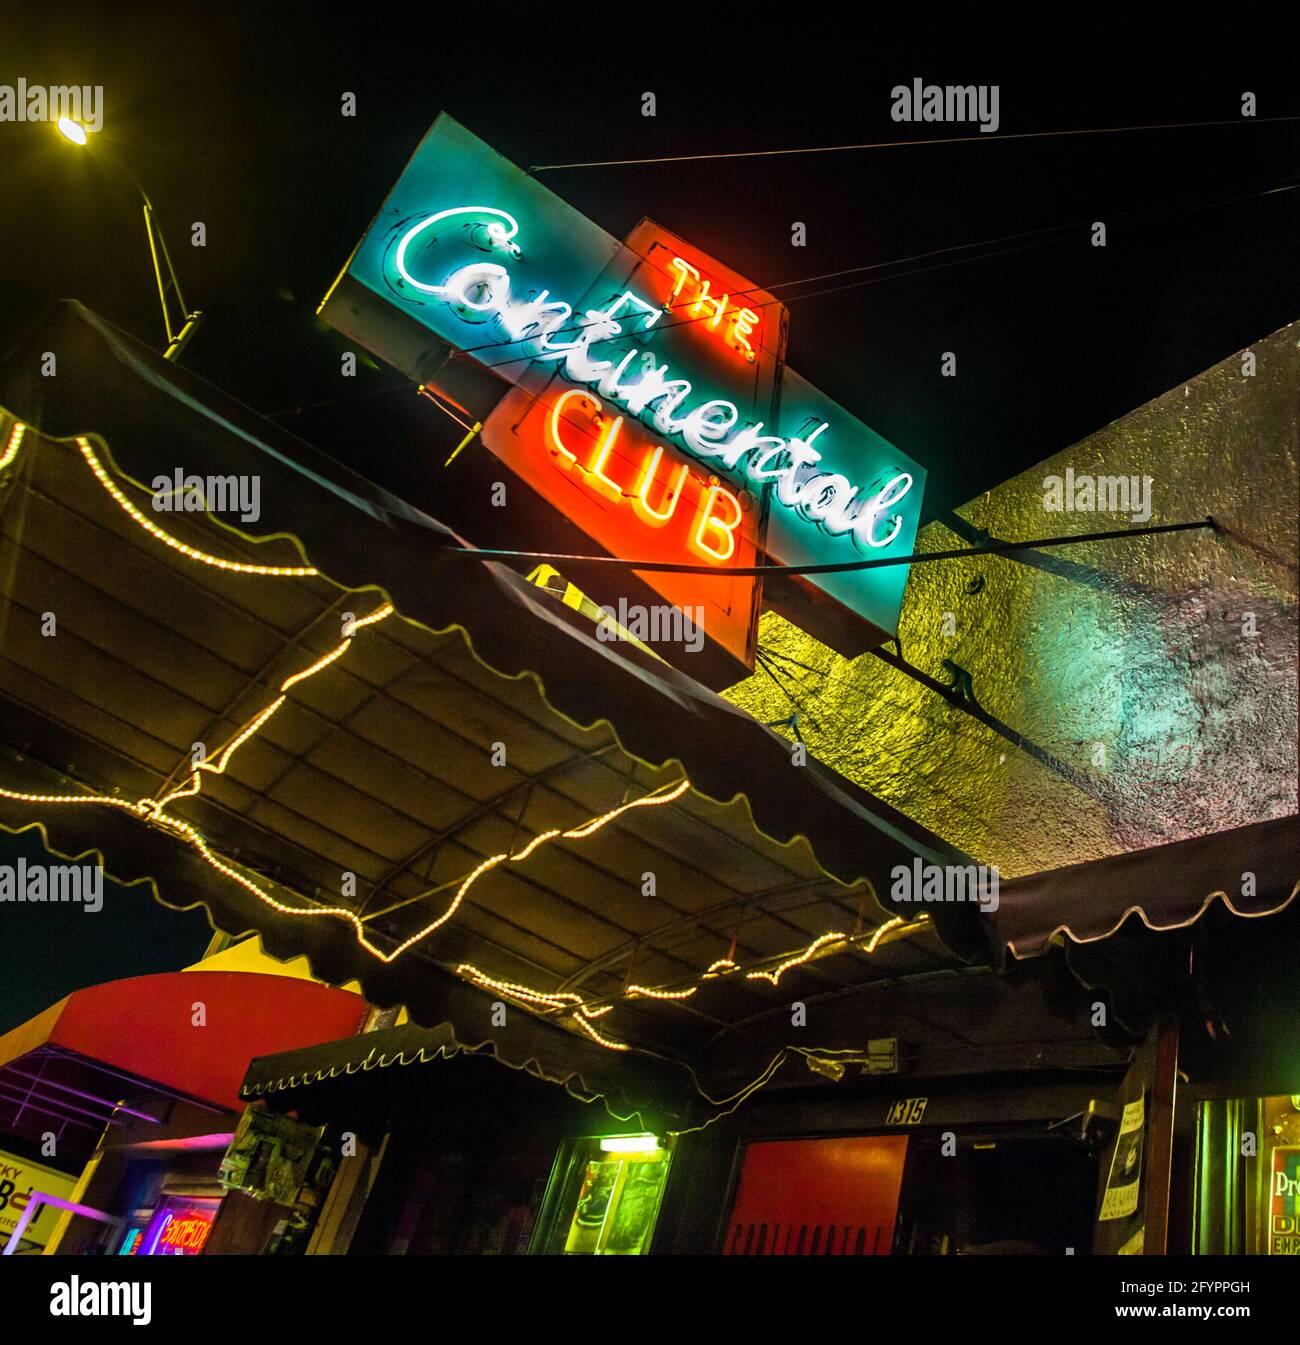 The legendary Continental Club on South Congress St. in Austin Texas, open since 1955, and currently a popular live music venue Stock Photo